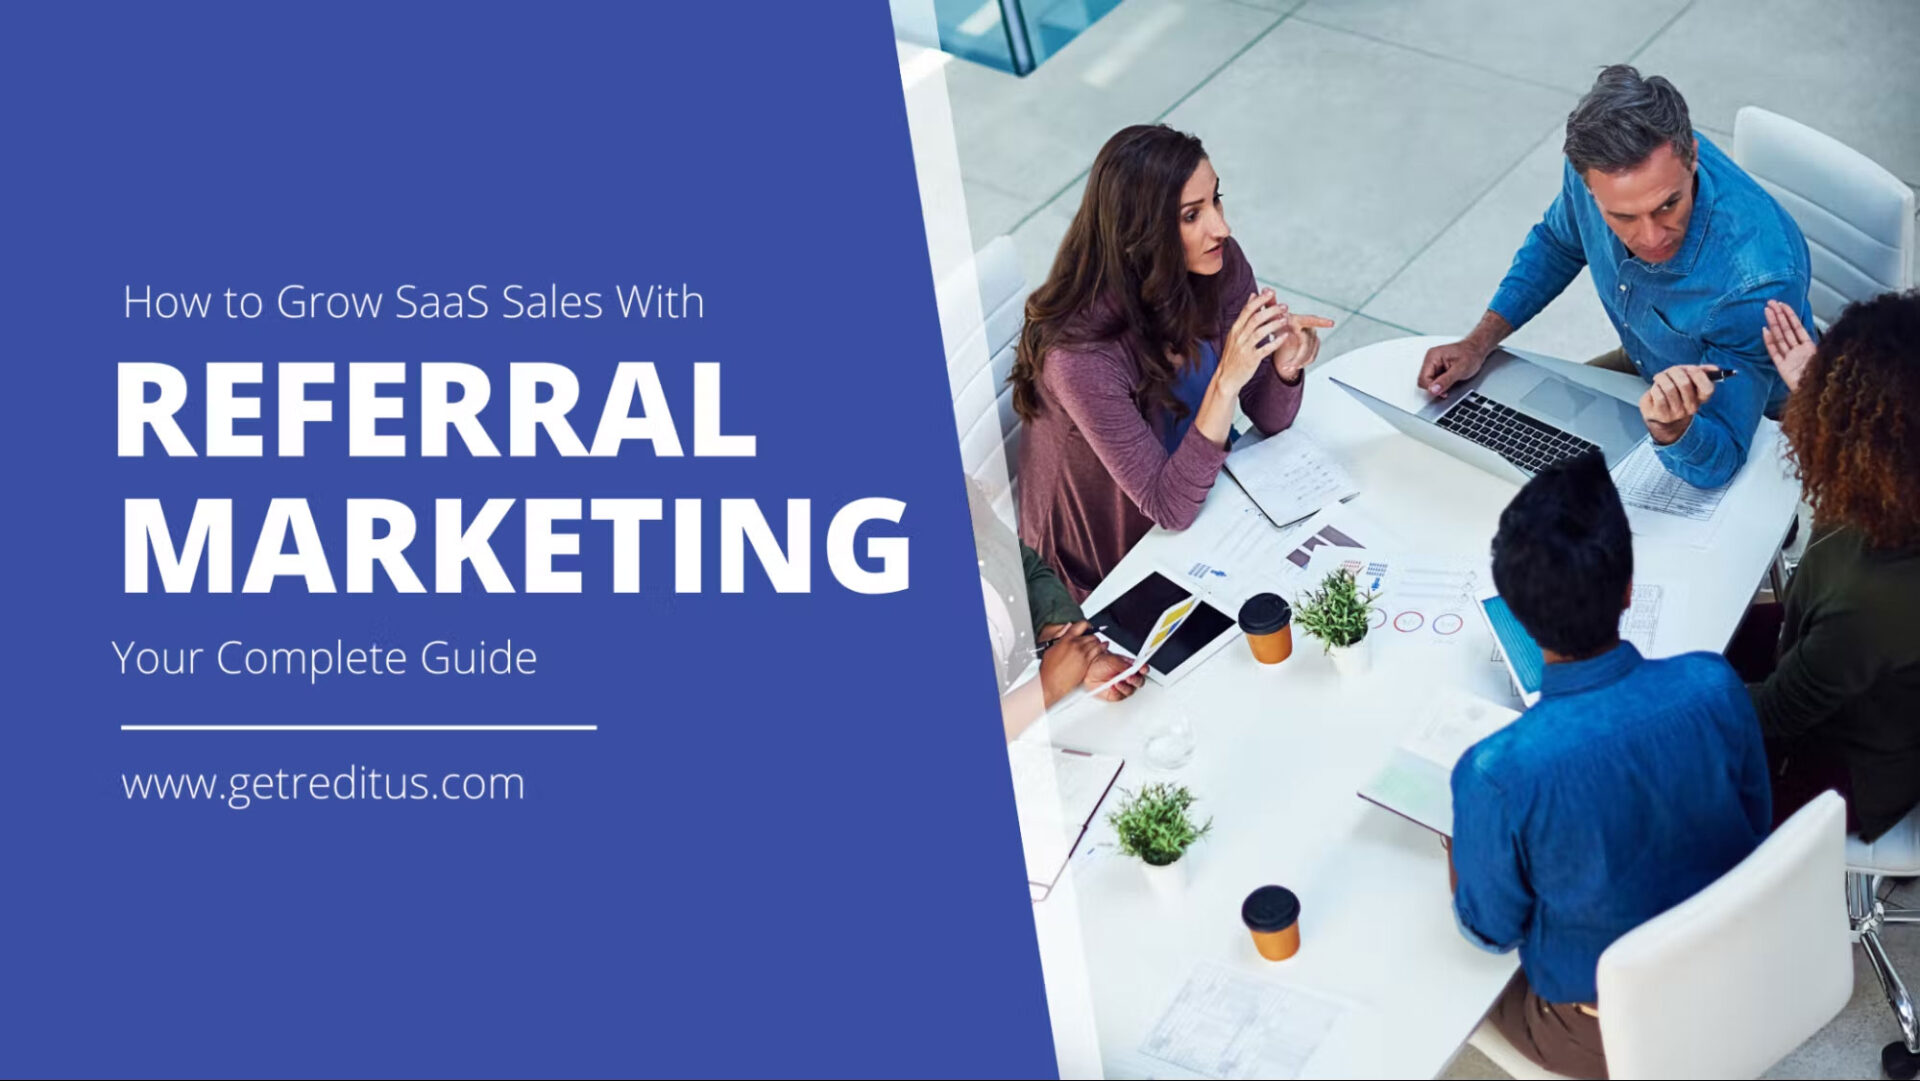 https://www.getreditus.com/blog/how-to-grow-saas-sales-with-referral-marketing/